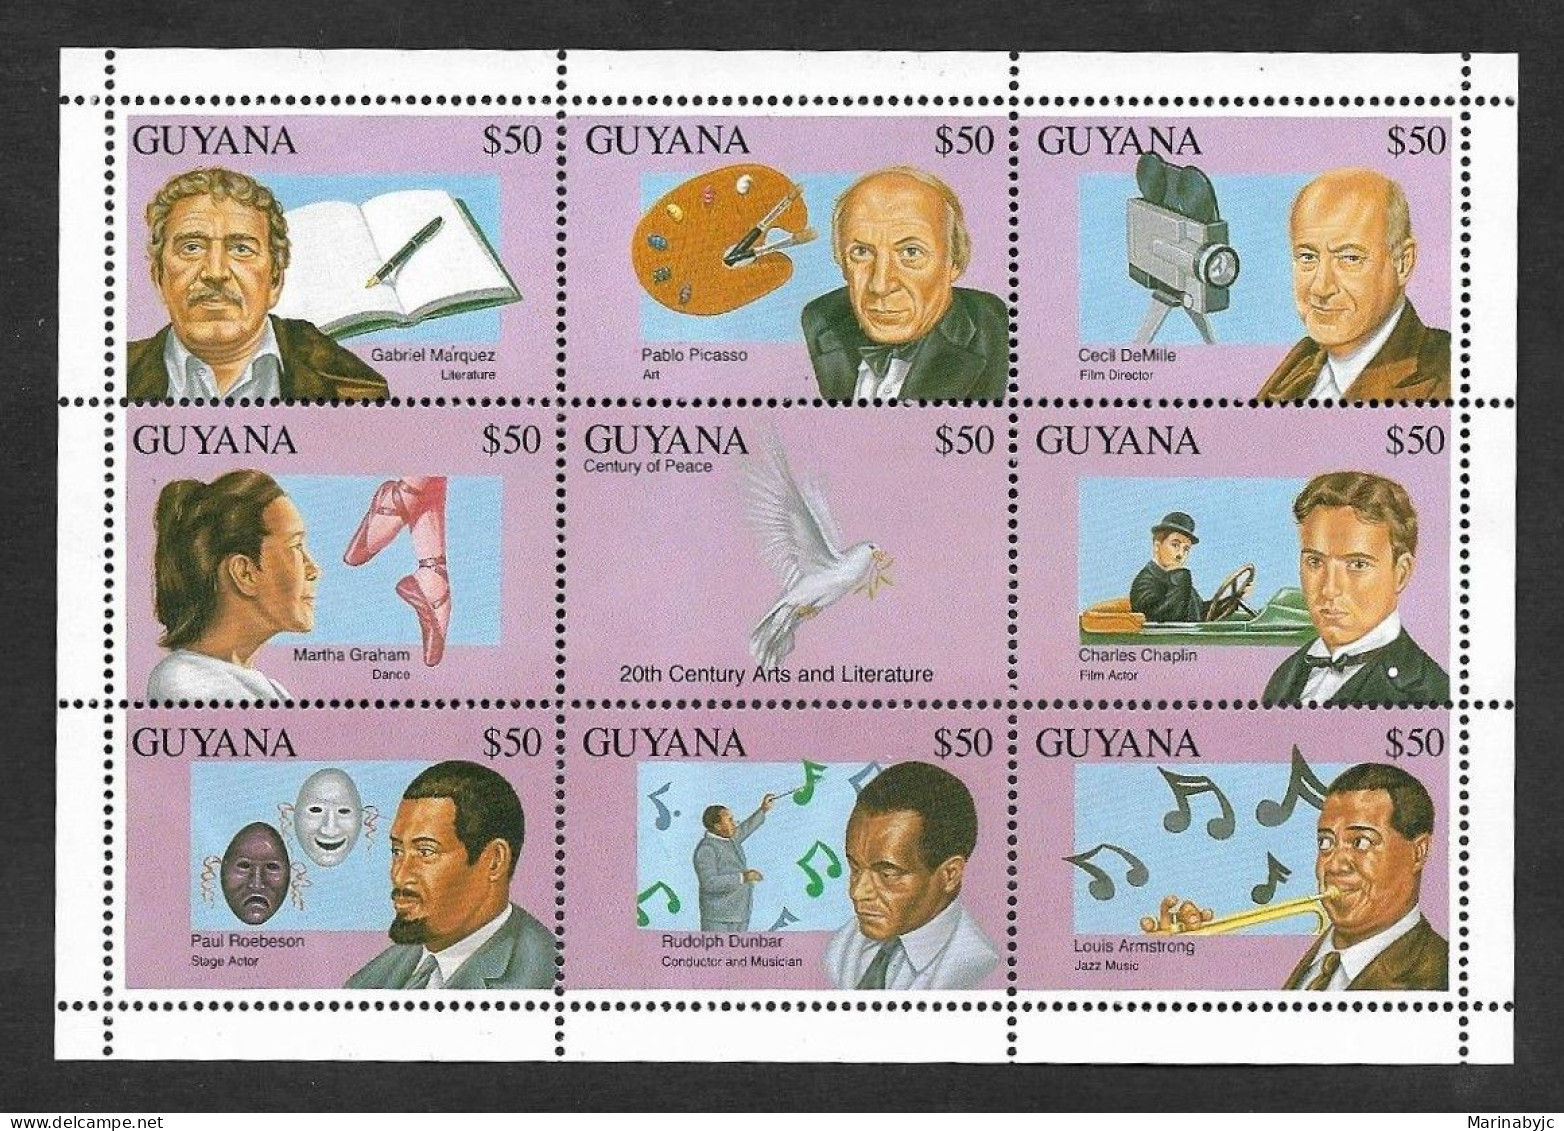 SD)1993 GUYANA FROM THE SERIES ART AND LITERATURE, CHARACTERS OF THE 20TH CENTURY, MINISHEET OF 9 STAMPS MNH - Guiana (1966-...)